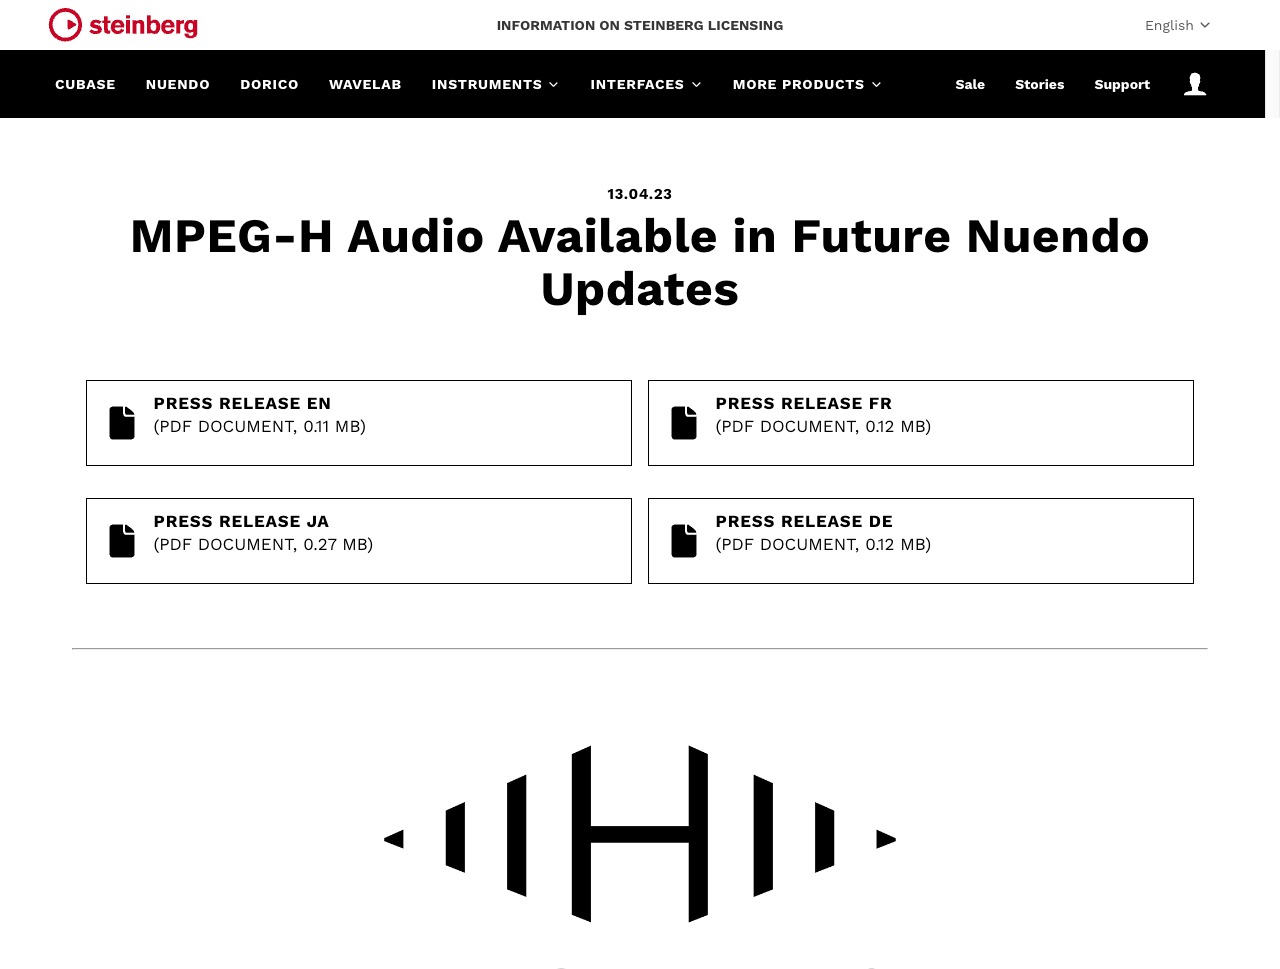 MPEG-H Audio Available in Future Nuendo Upd… | Steinberg